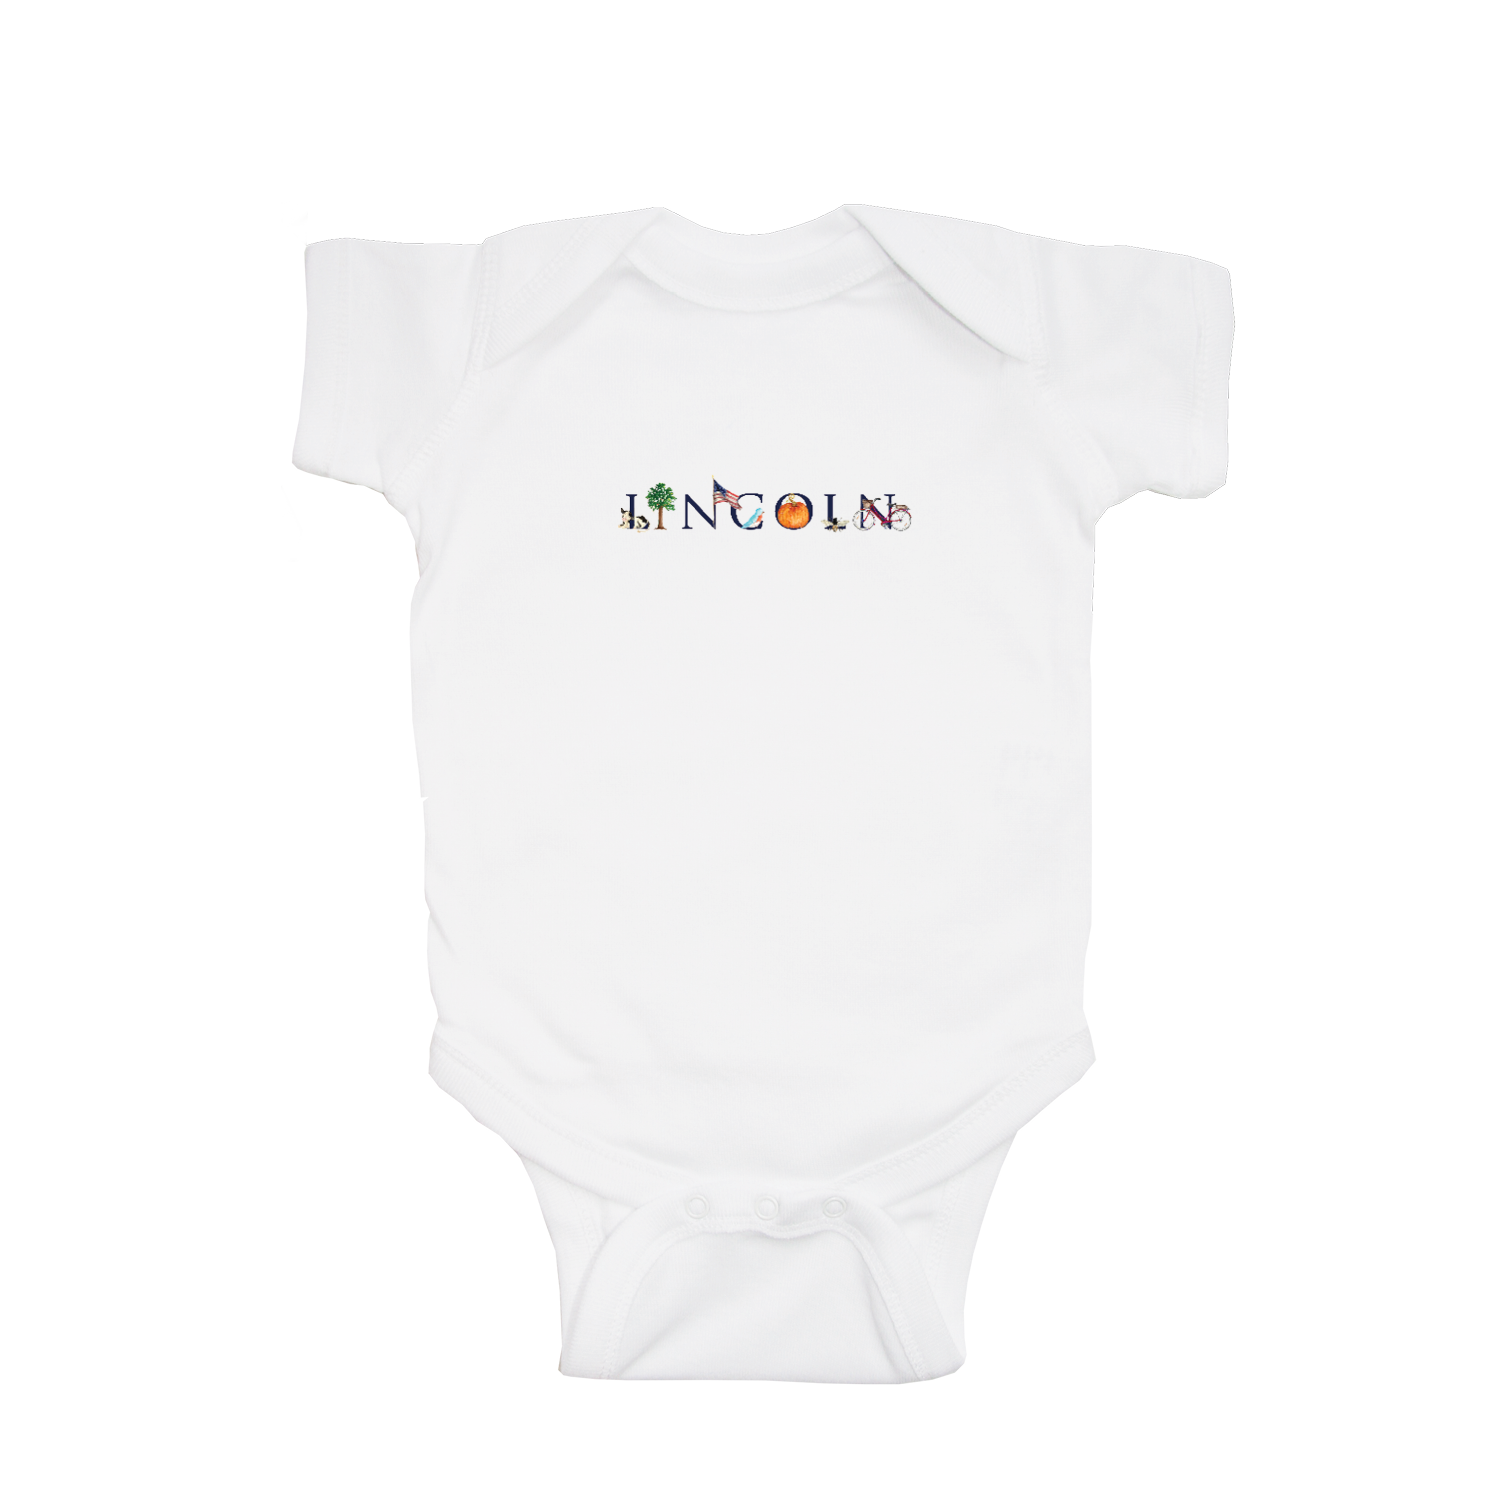 Lincoln baby snap up short sleeve